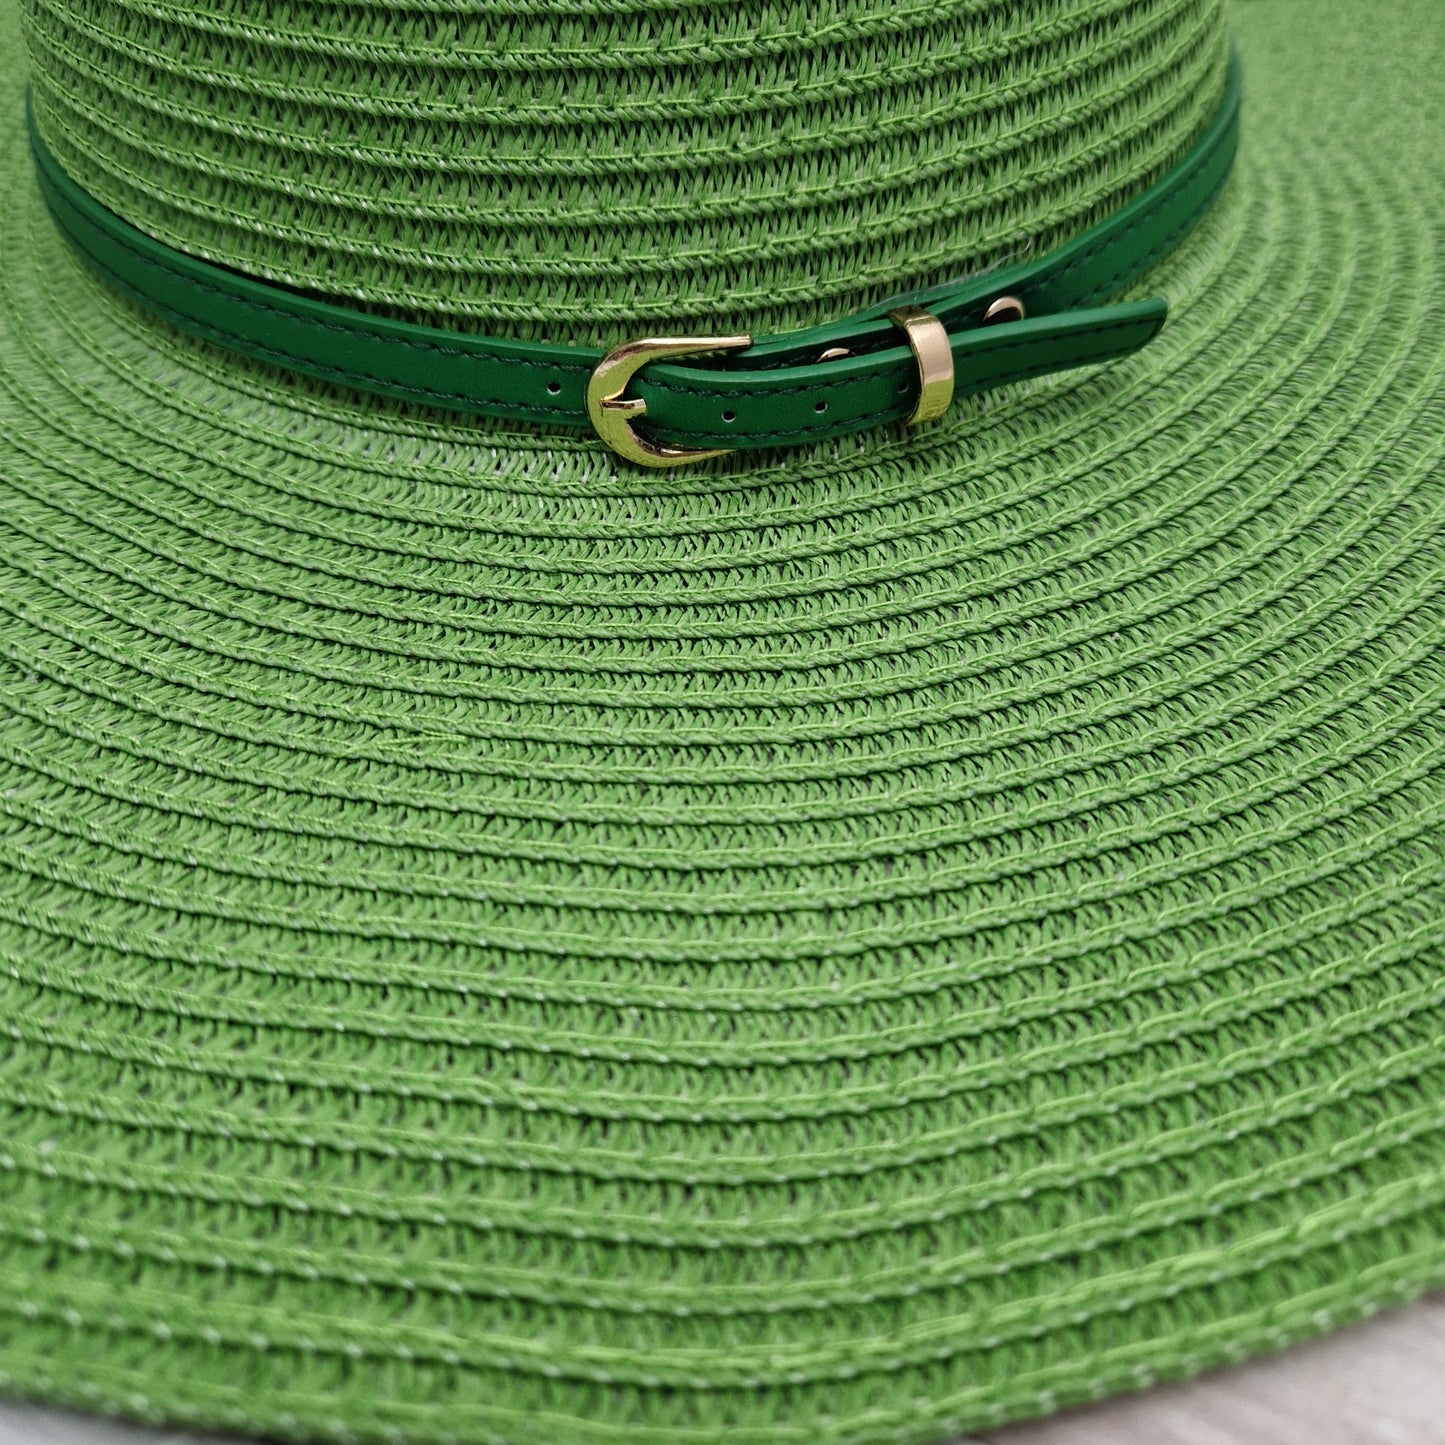 Wide brimmed emerald green hat with matching belted band.